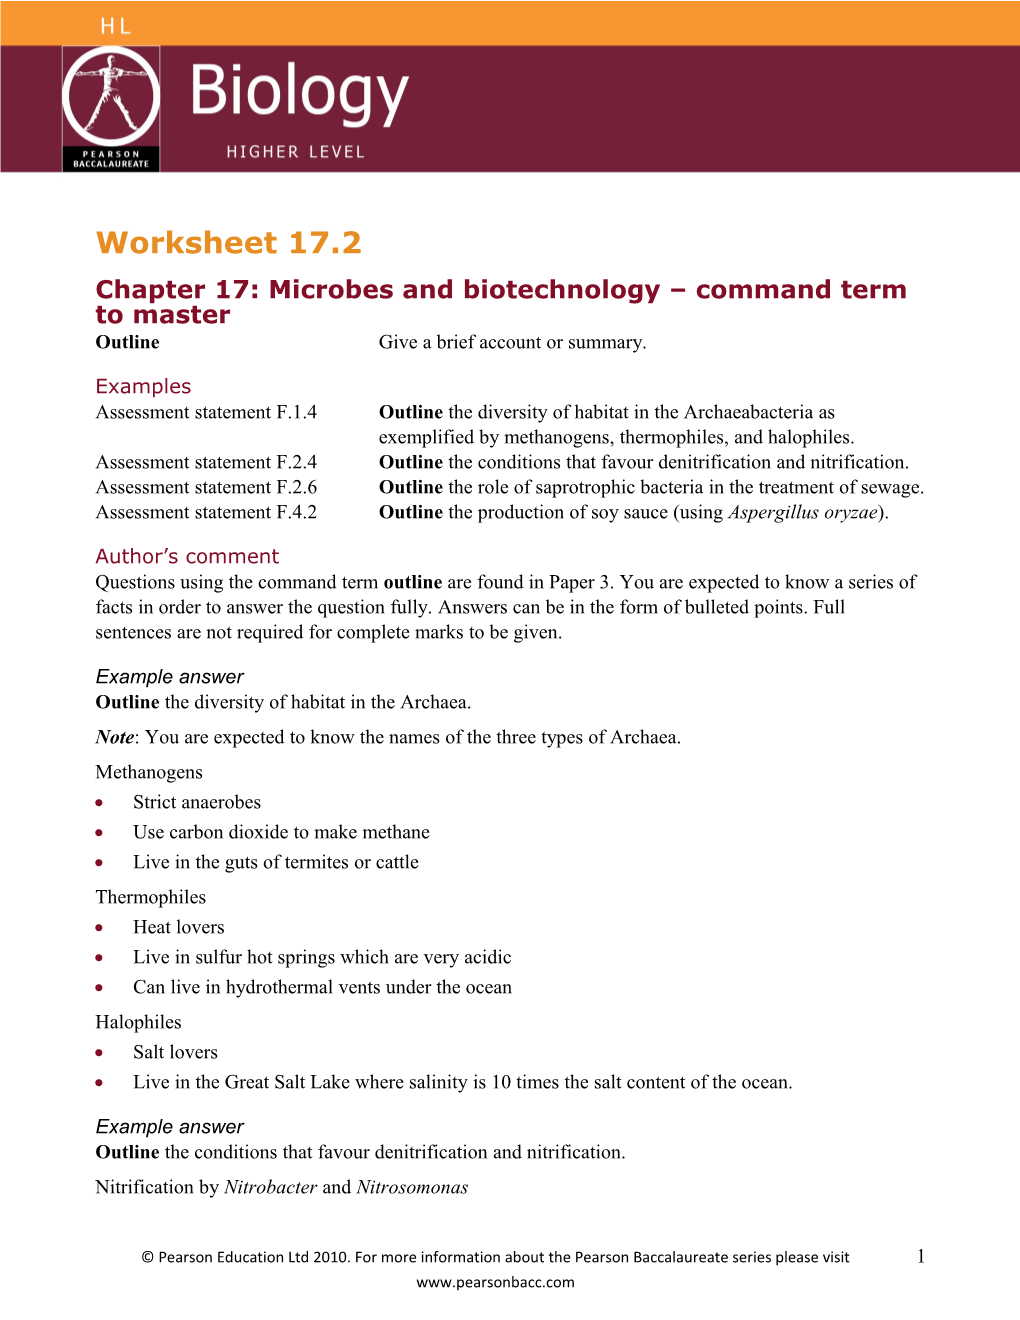 Chapter 17: Microbes and Biotechnology Command Term to Master